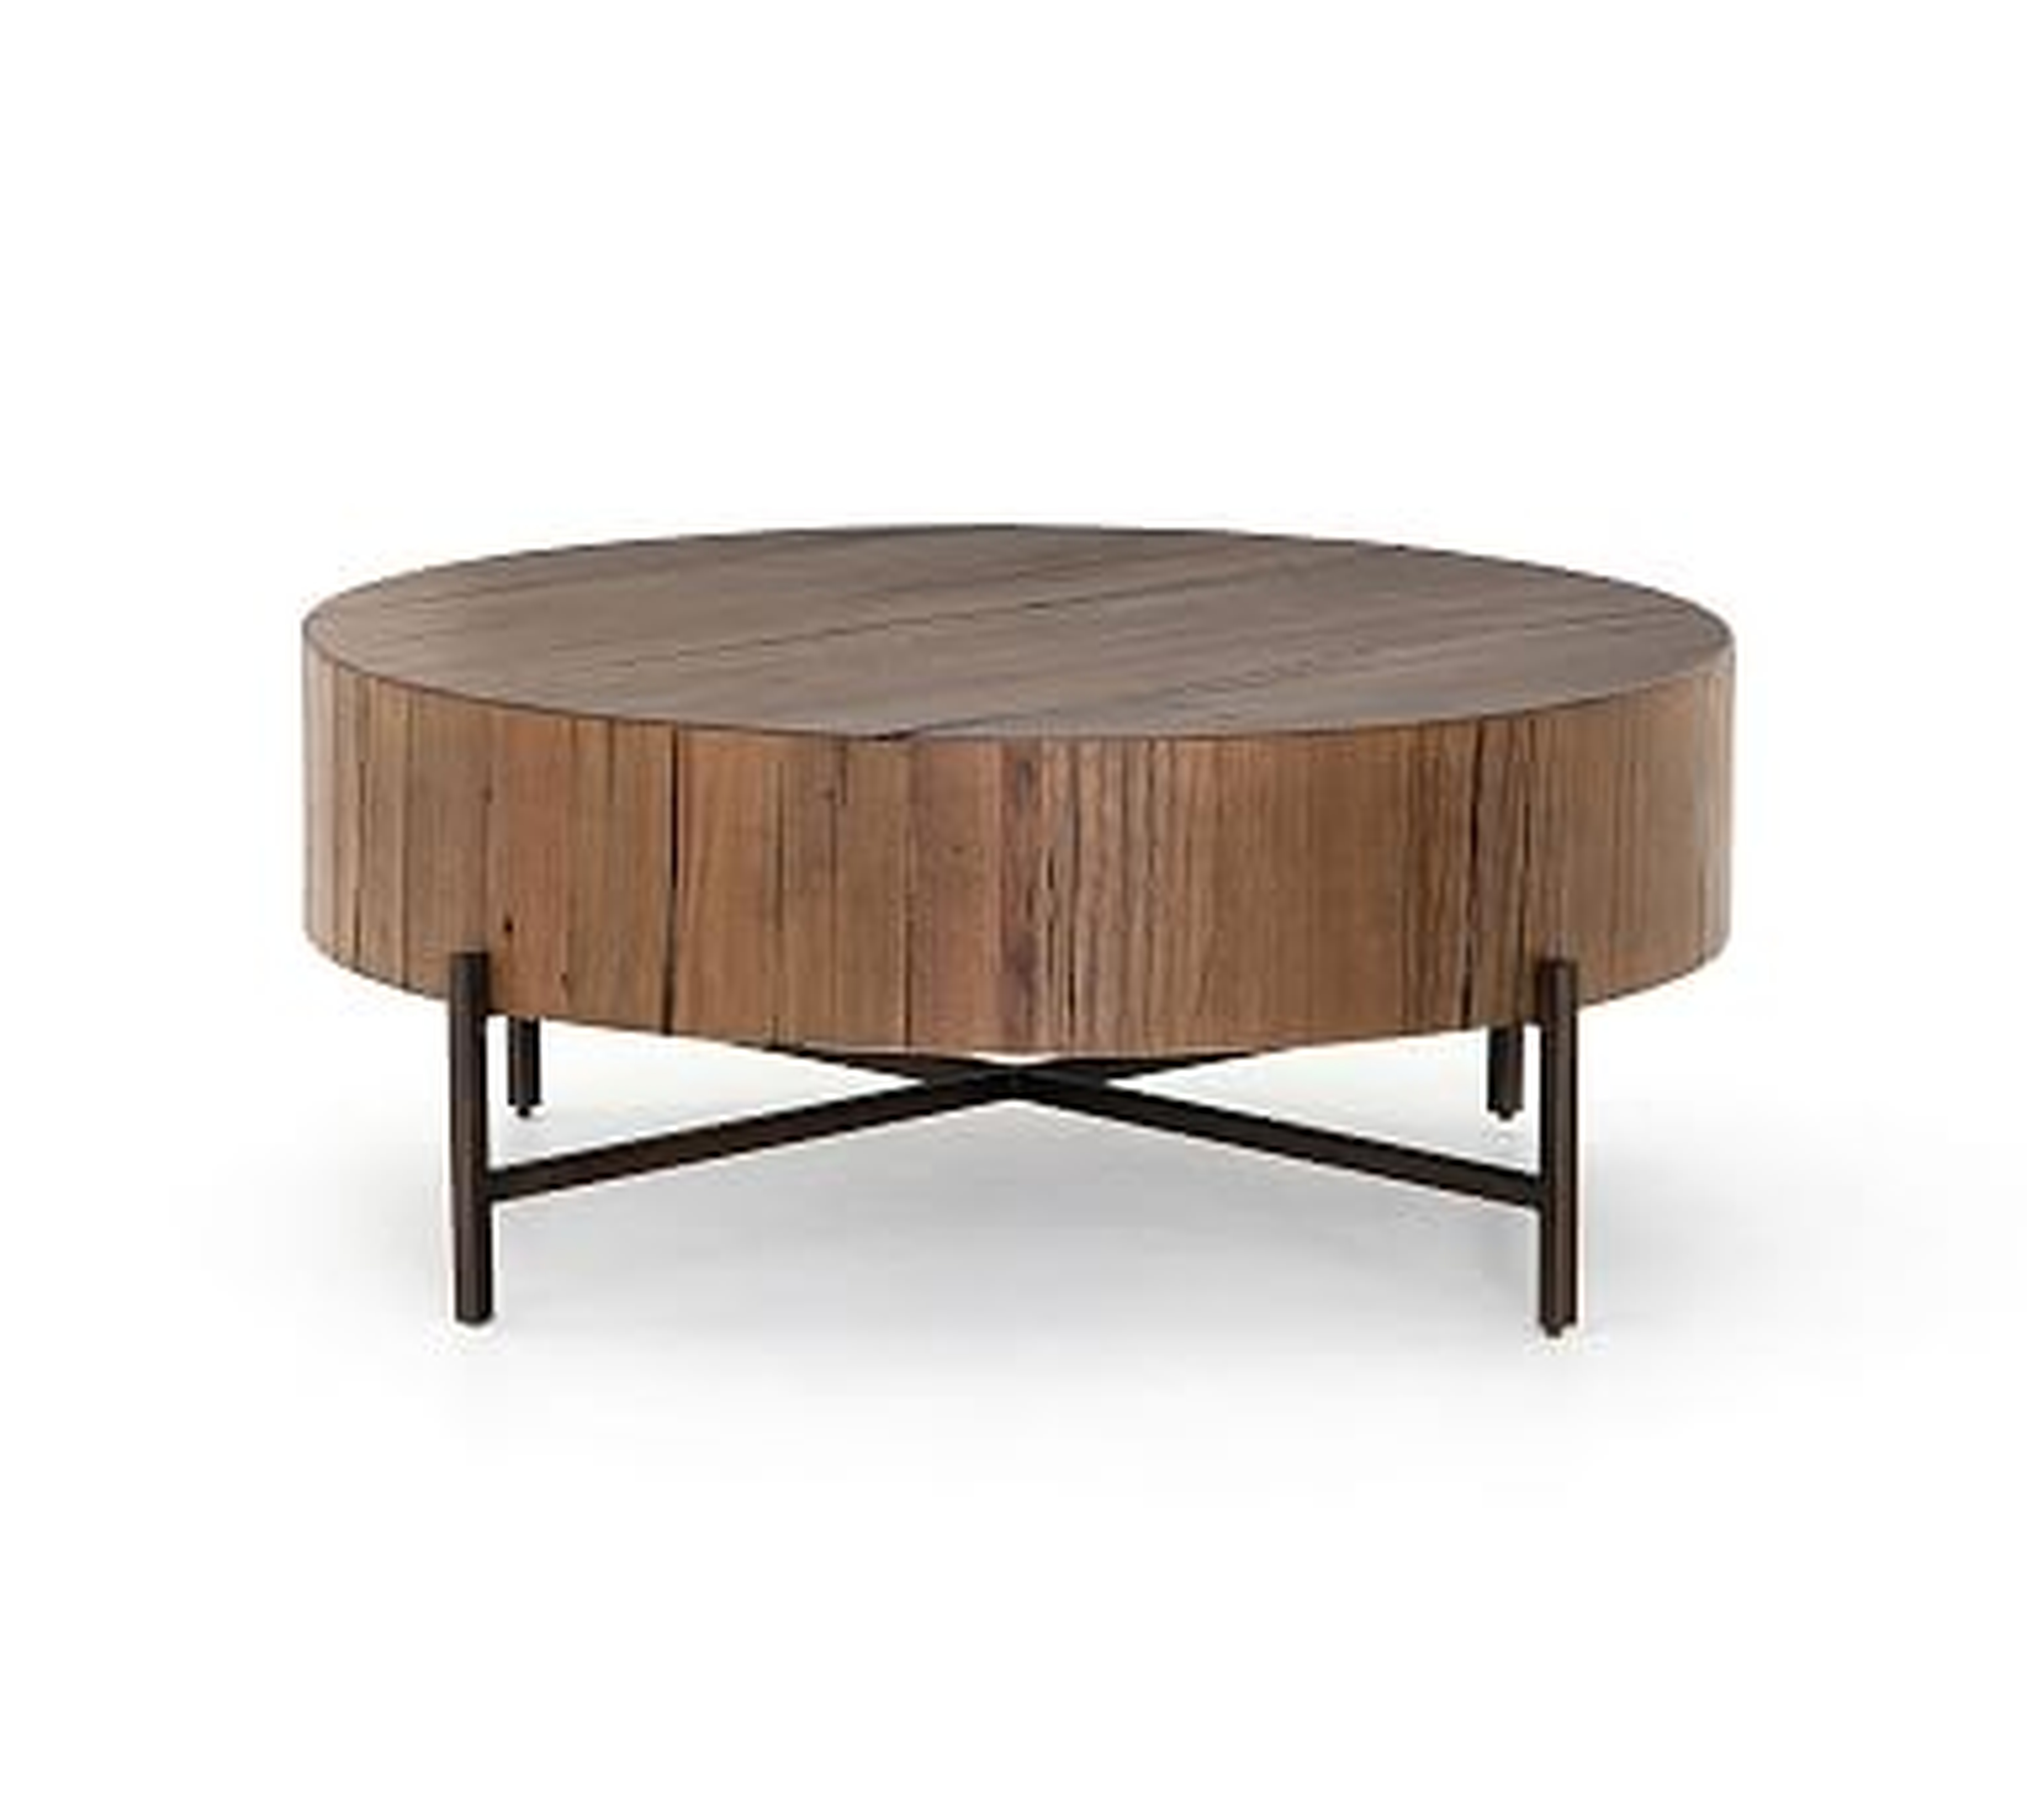 Fargo Round Coffee Table, Natural Brown/Patina Copper - Pottery Barn